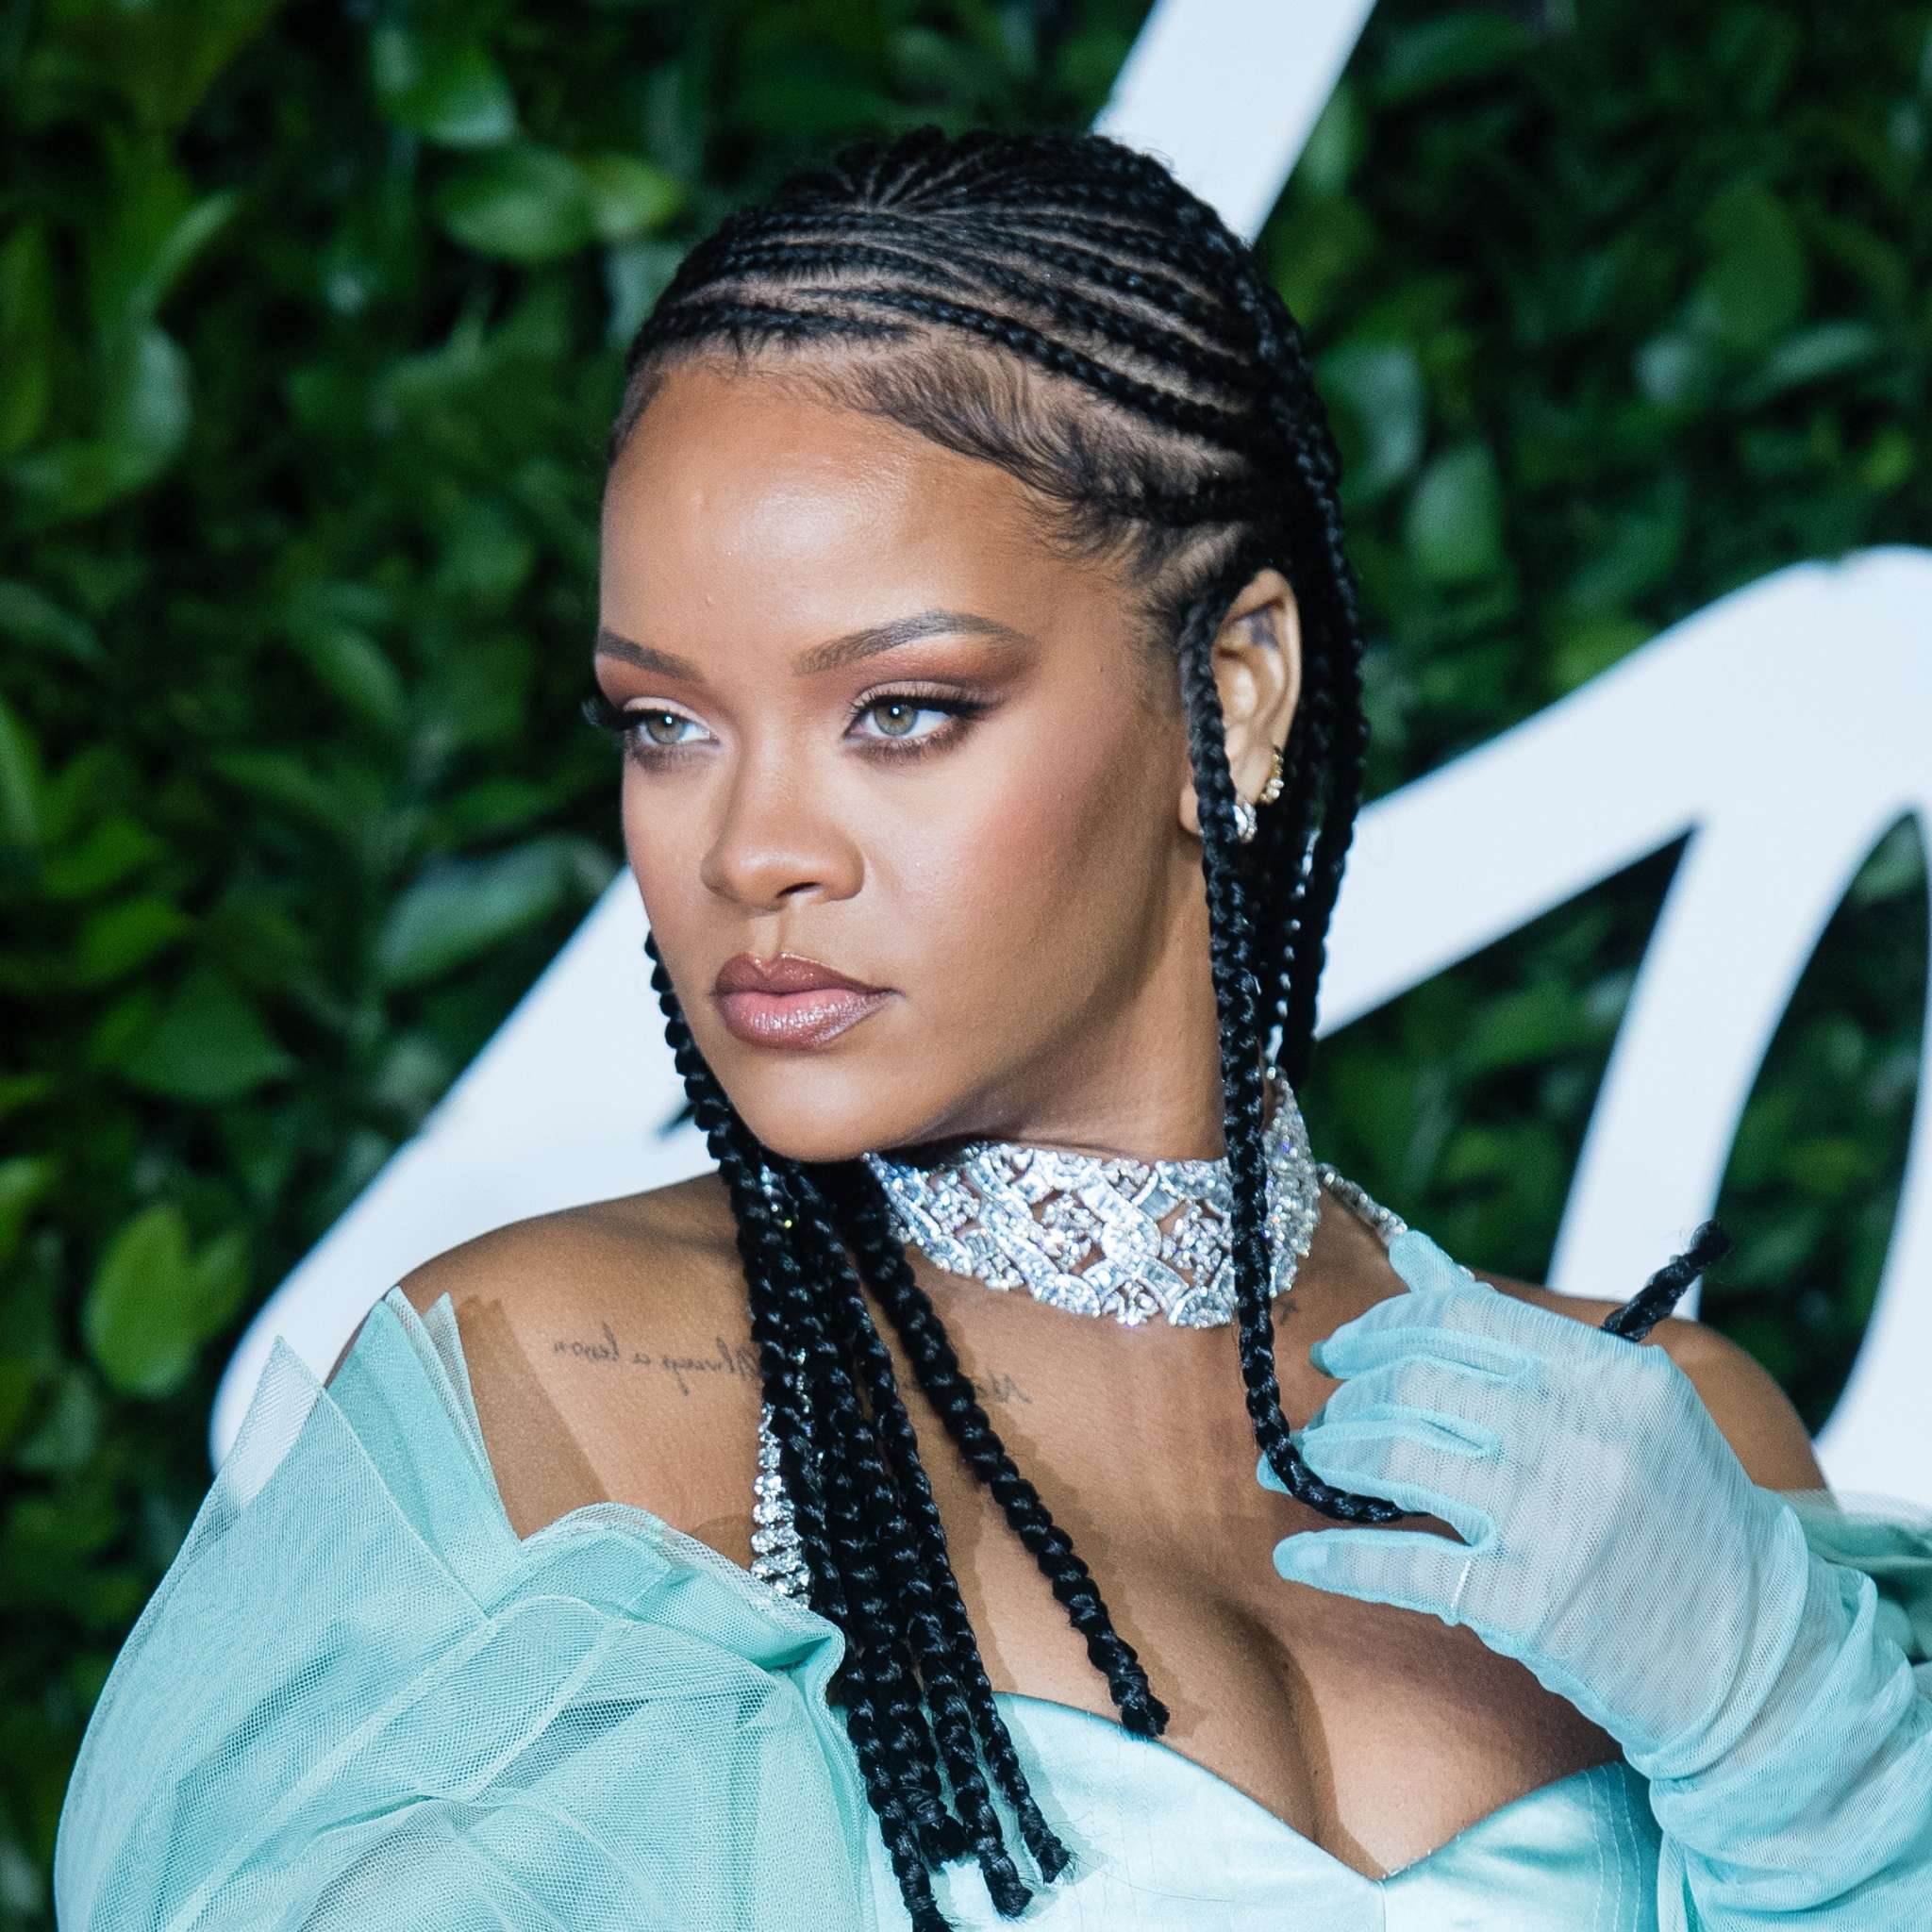 rihanna-has-fans-excited-with-details-about-her-new-music